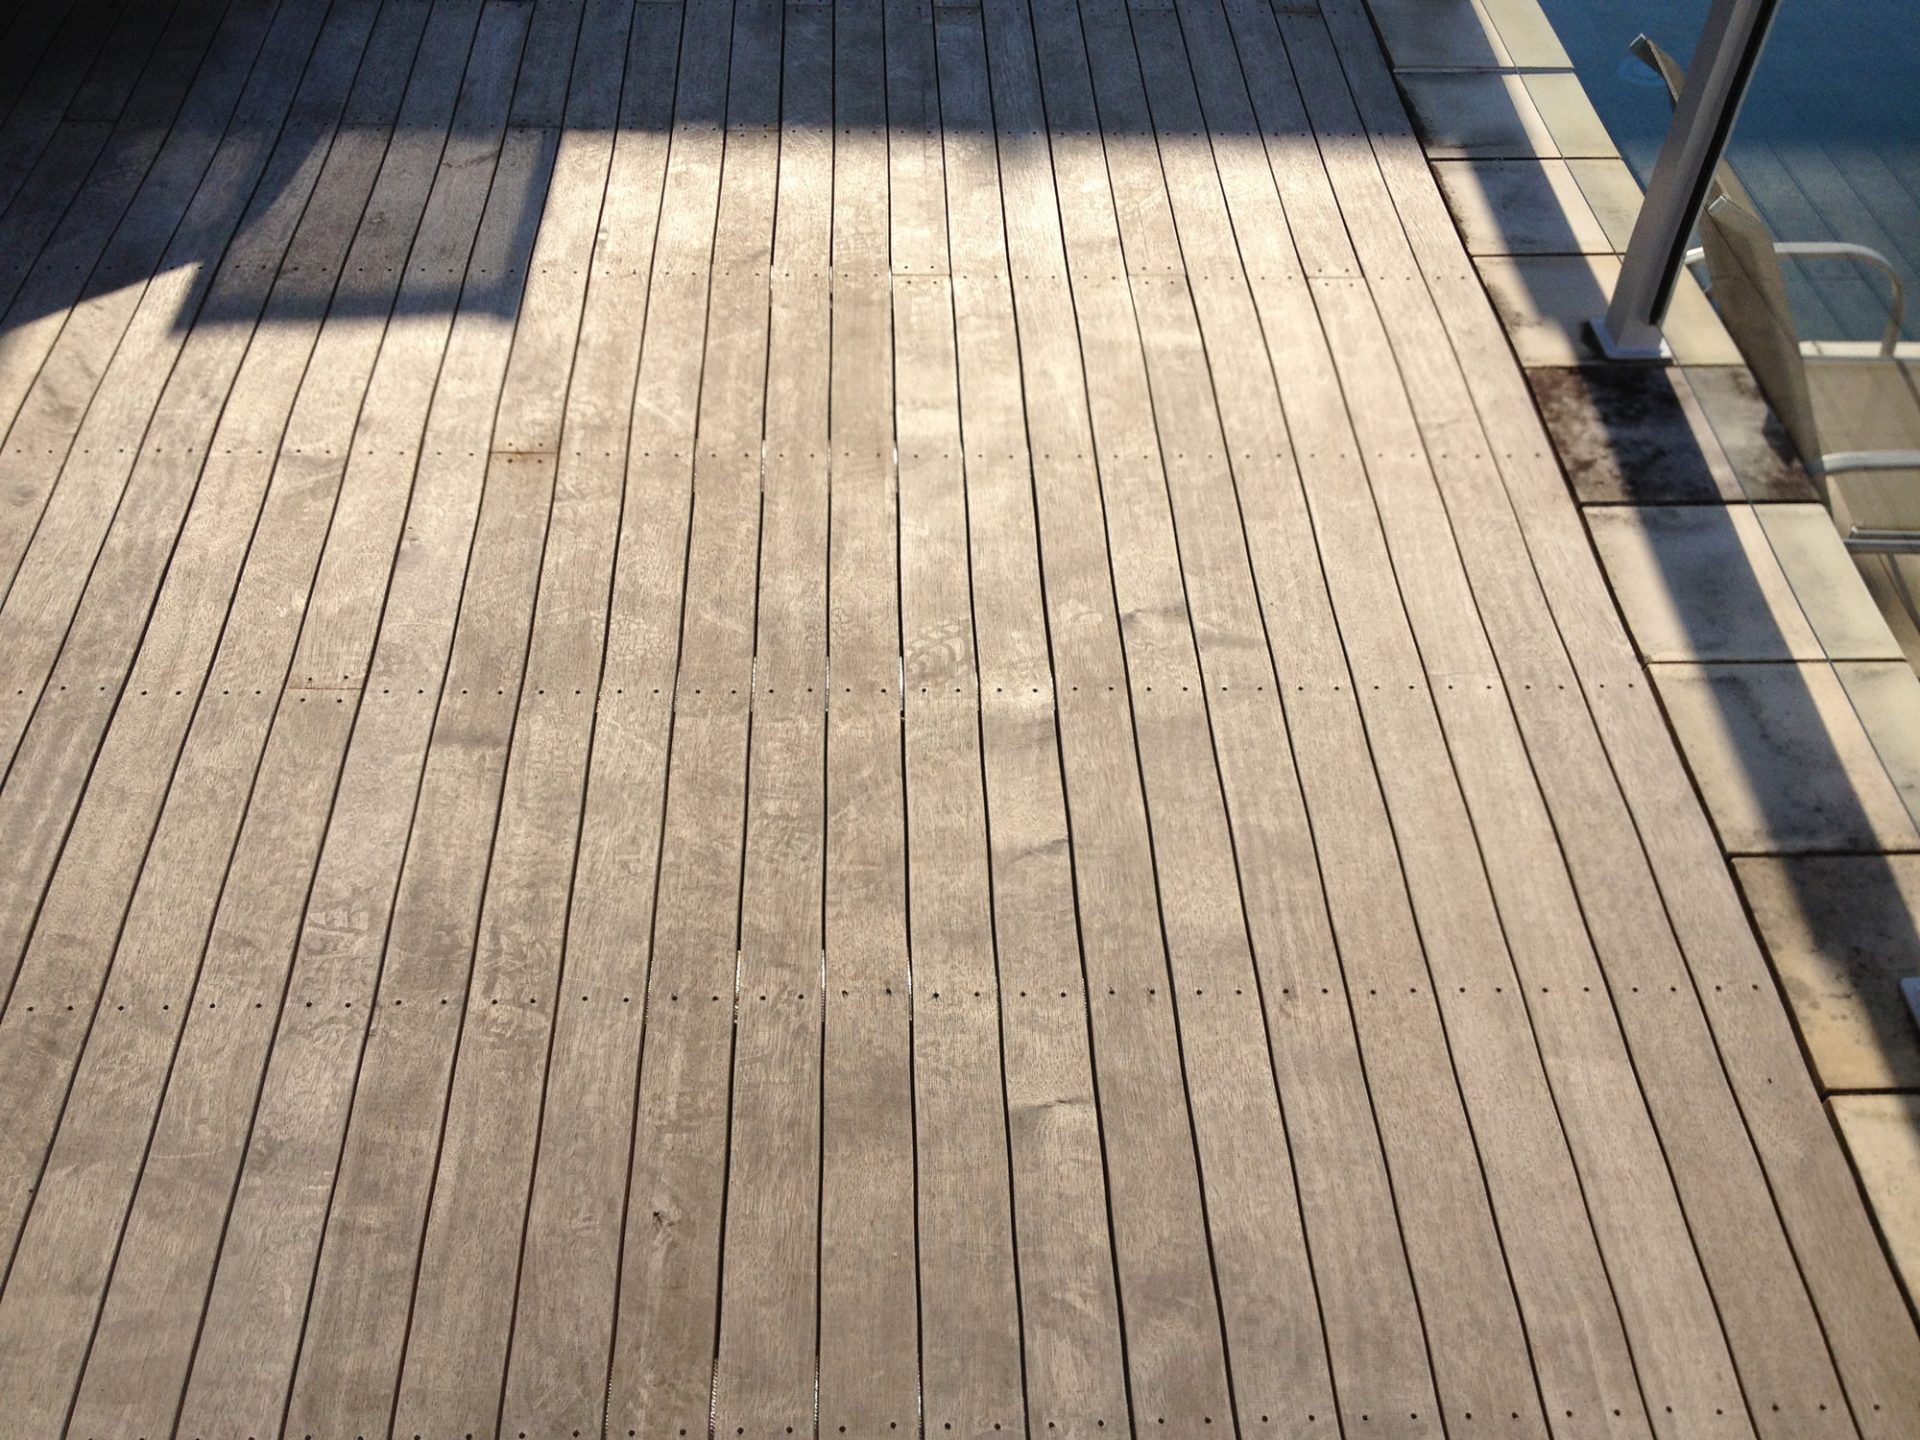 Clean light timber deck with the morning sun on it